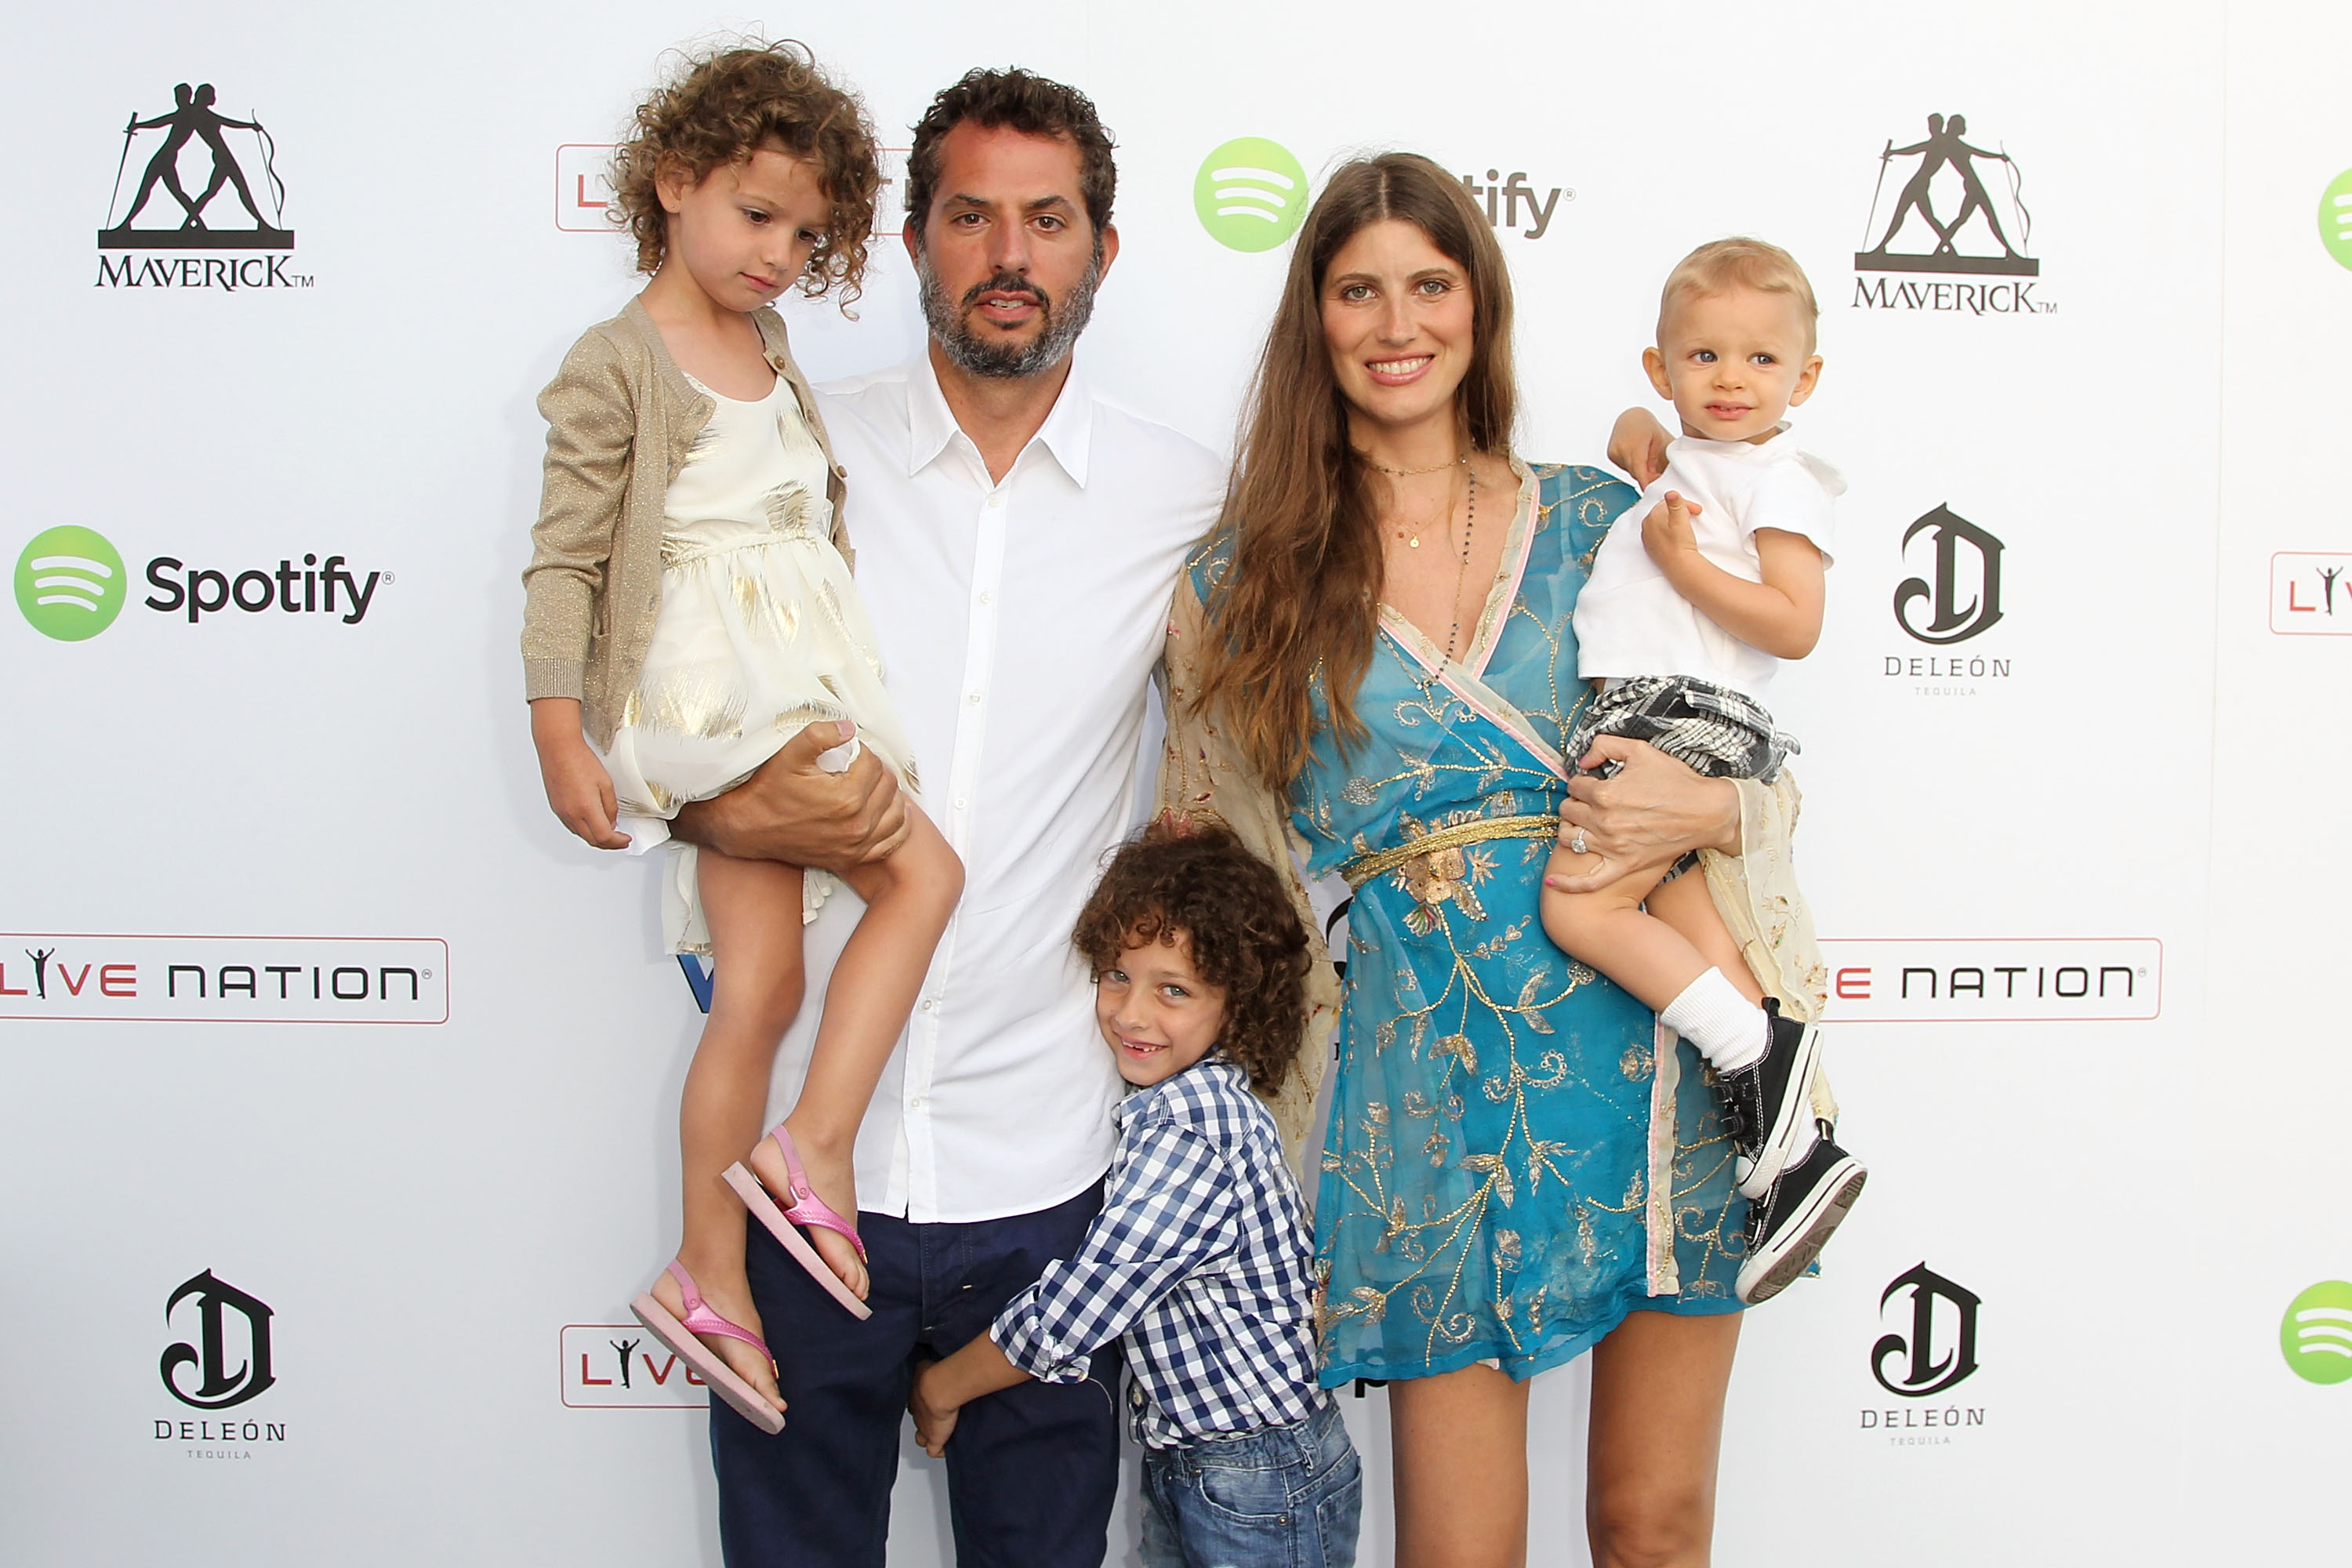 MALIBU, CA - JULY 04:  (L-R) Guy Oseary, Michelle Alves and family attend the DeLeon Tequila Presents Guy Oseary's 4th Of July Bash at Nobu Malibu on July 4, 2013 in Malibu, California.  (Photo by Jonathan Leibson/WireImage)